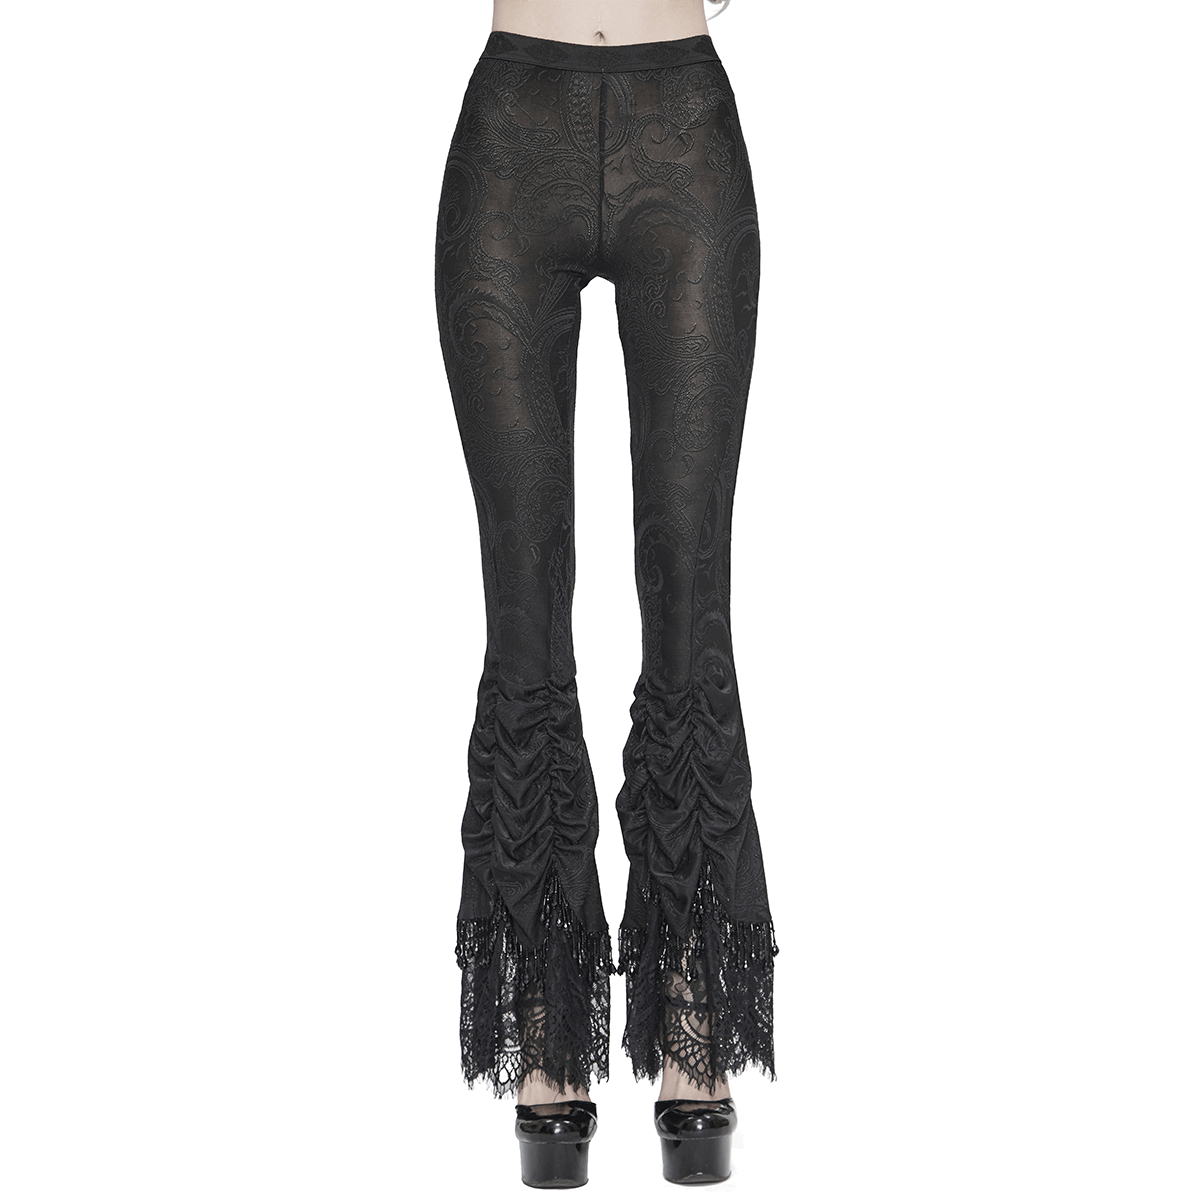 Women's Vintage Gothic Black Laced Trimmed Flared Trousers